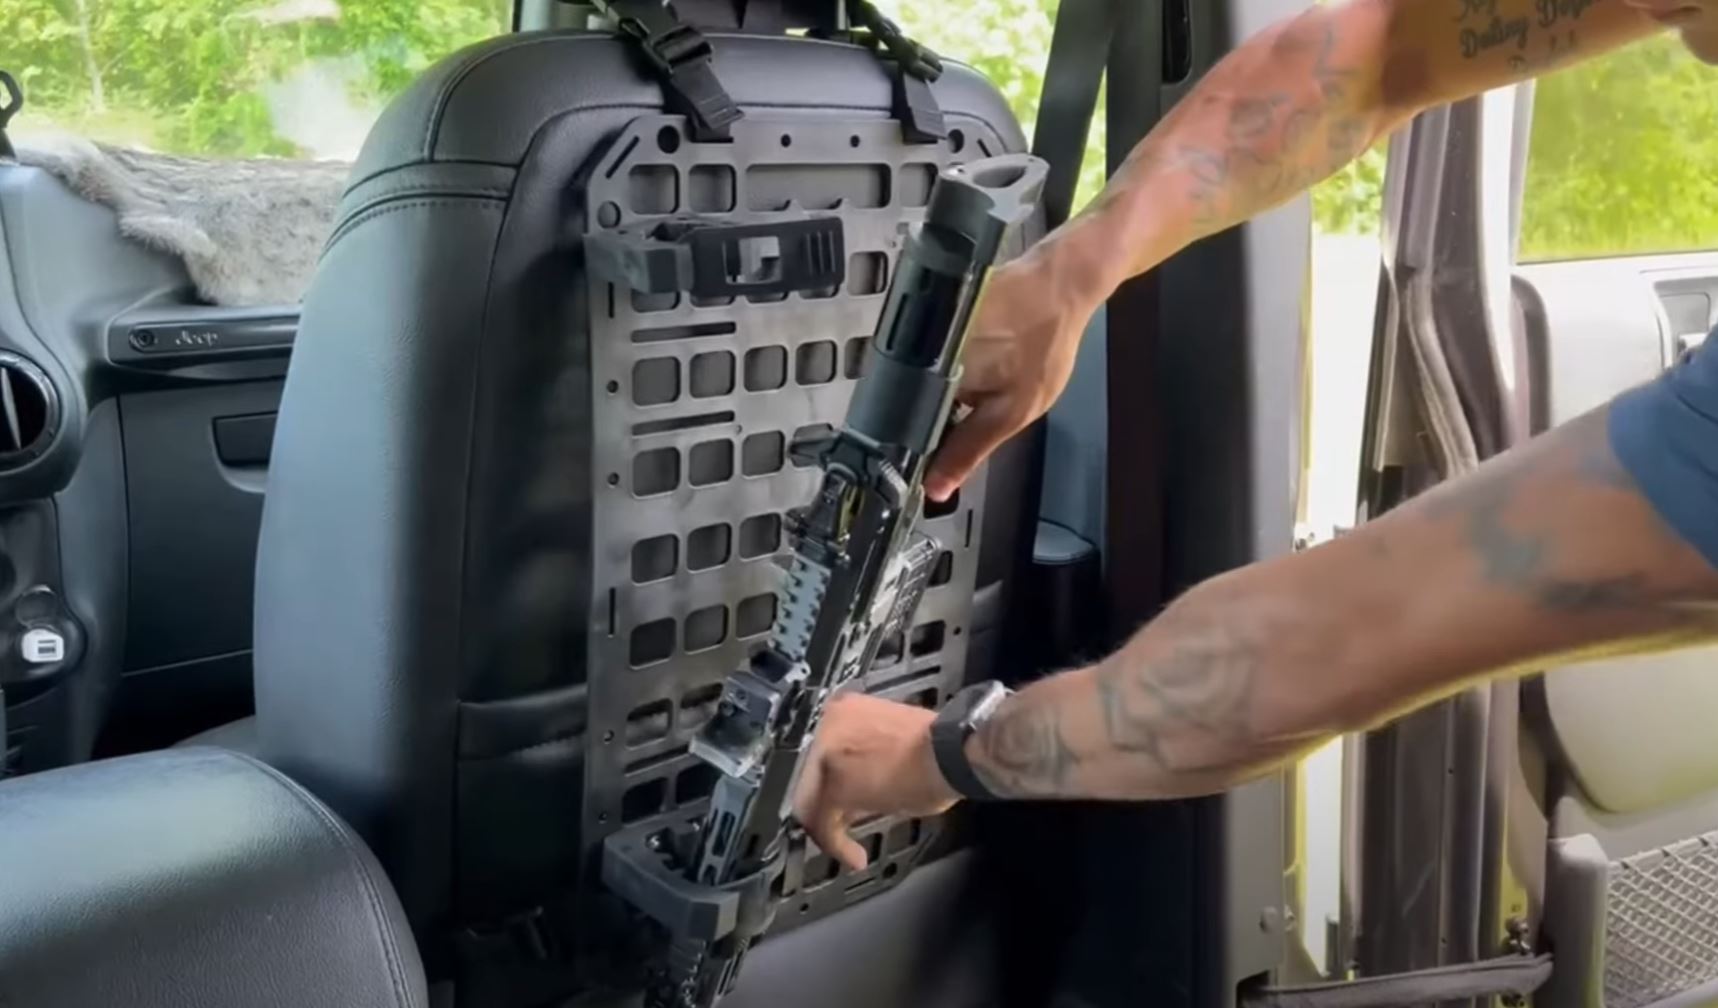 New More Affordable Seatback RMP Rig from Grey Man Tactical